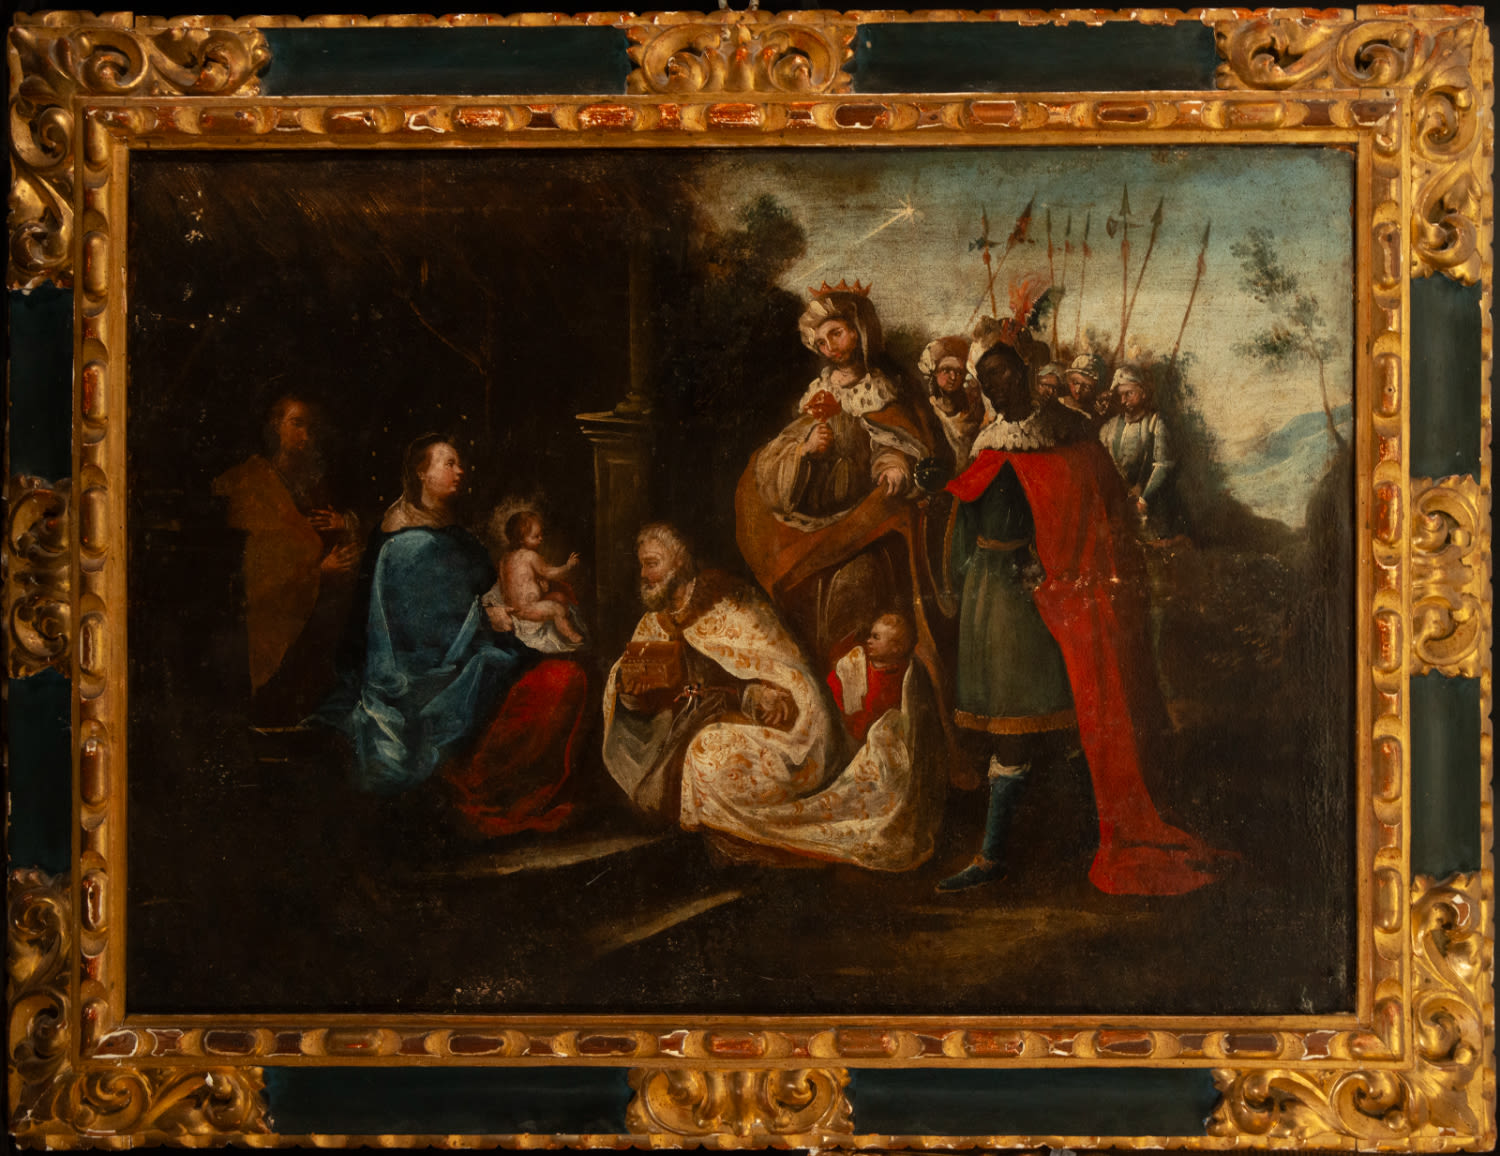 Adoration of the Three Wise Men, 18th century Andalusian school, with baroque period frame - Image 2 of 7